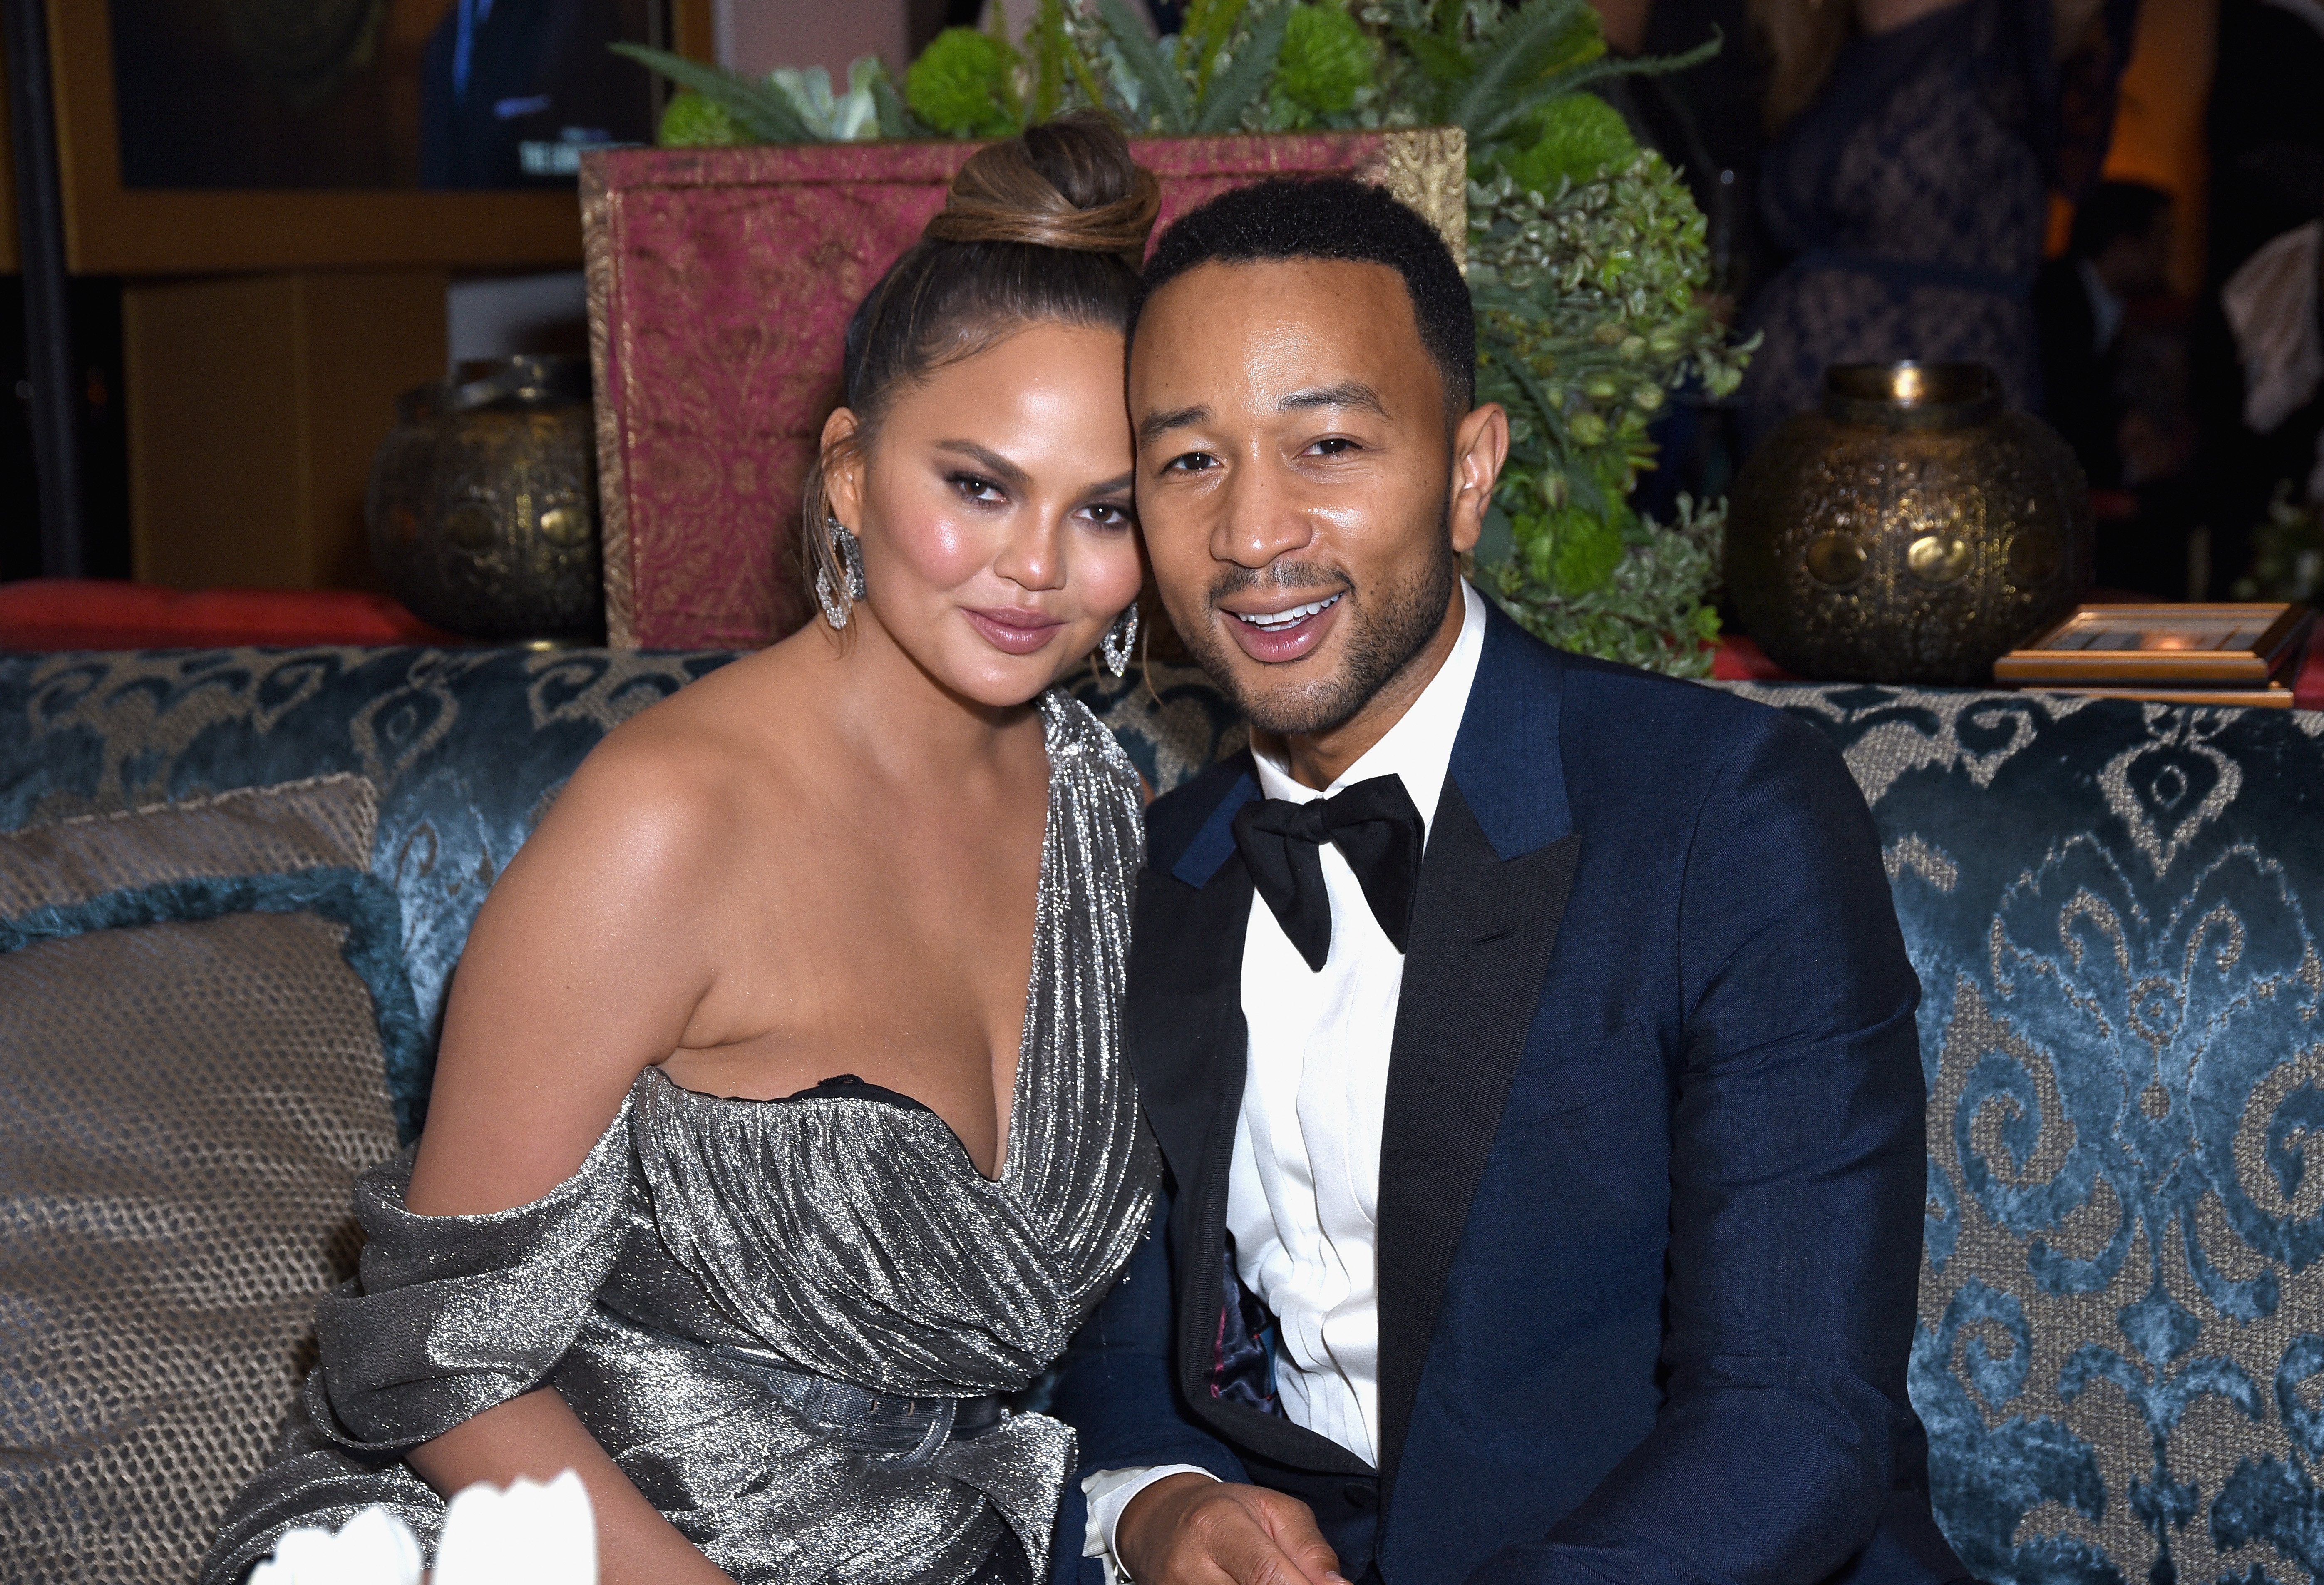 Chrissy Teigen and John Legend attend Hulu's 2018 Emmy Party on September 17, 2018, in Los Angeles, California  | Photo: Getty Images